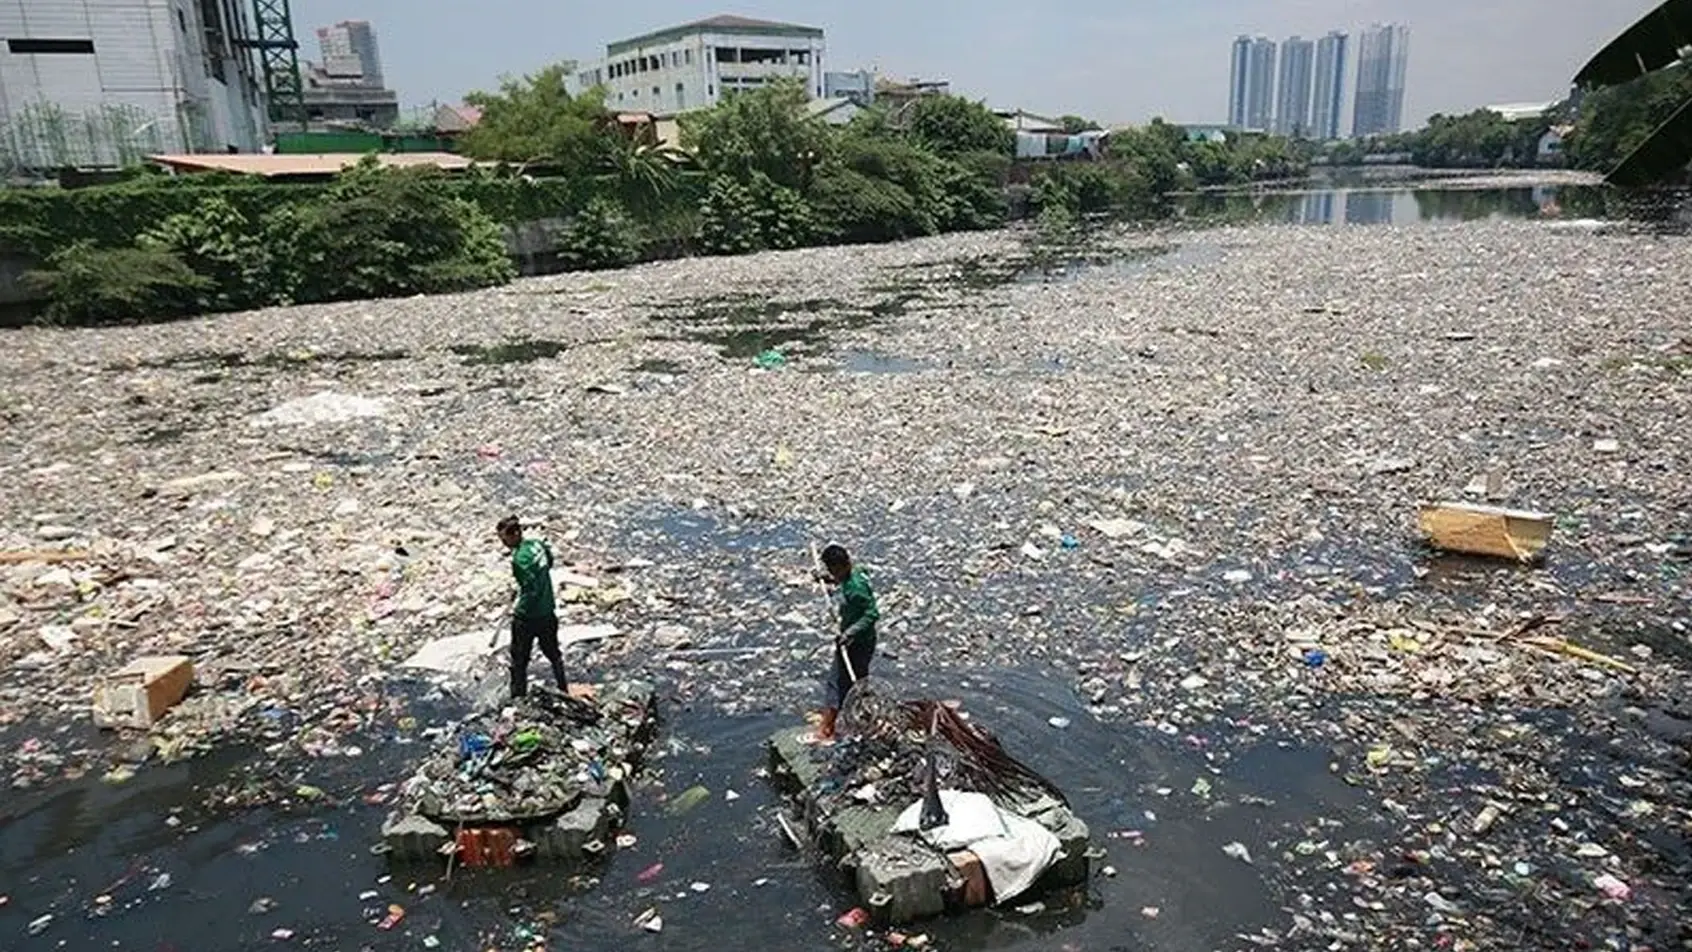 In Manila, a big city in the Philippines with 13 million people on an area of 1,470 square kilometres, there are amazing “river warriors”. They work really hard to clean up the dirty Pasig River, removing lots of plastic and rubbish. These heroes are making the river better and teaching people how to take care of it.